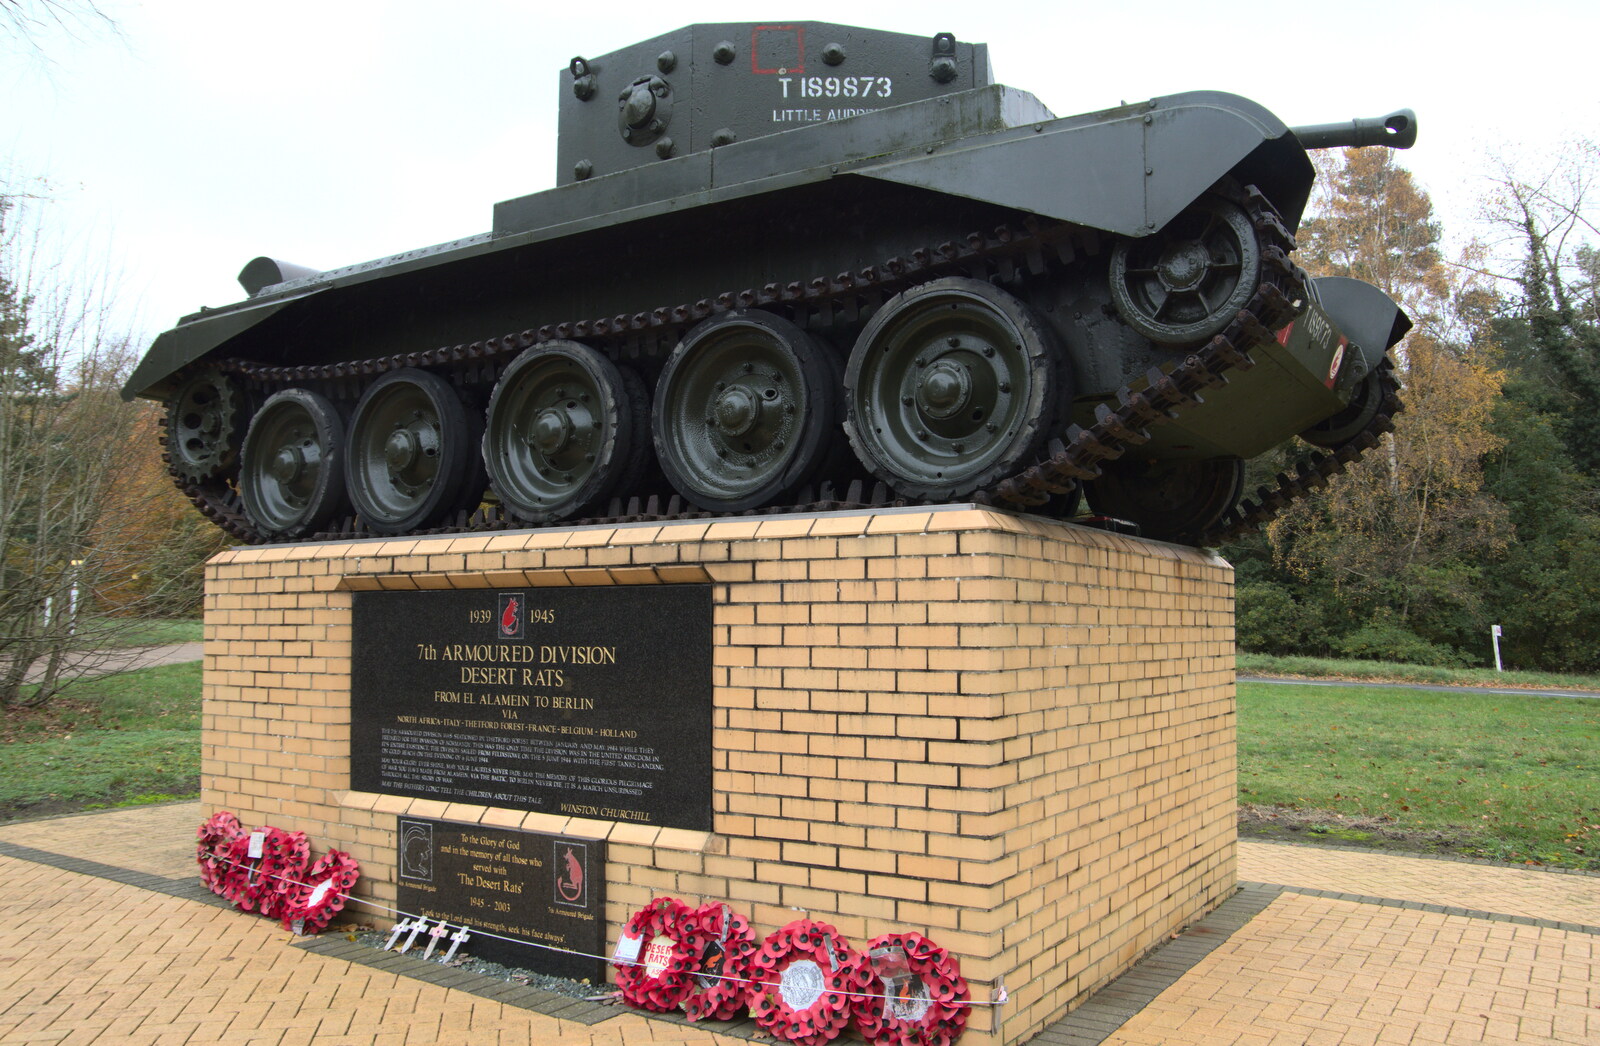 A tank memorial to the Desert Rats from A Trip to Sandringham Estate, Norfolk - 31st October 2020